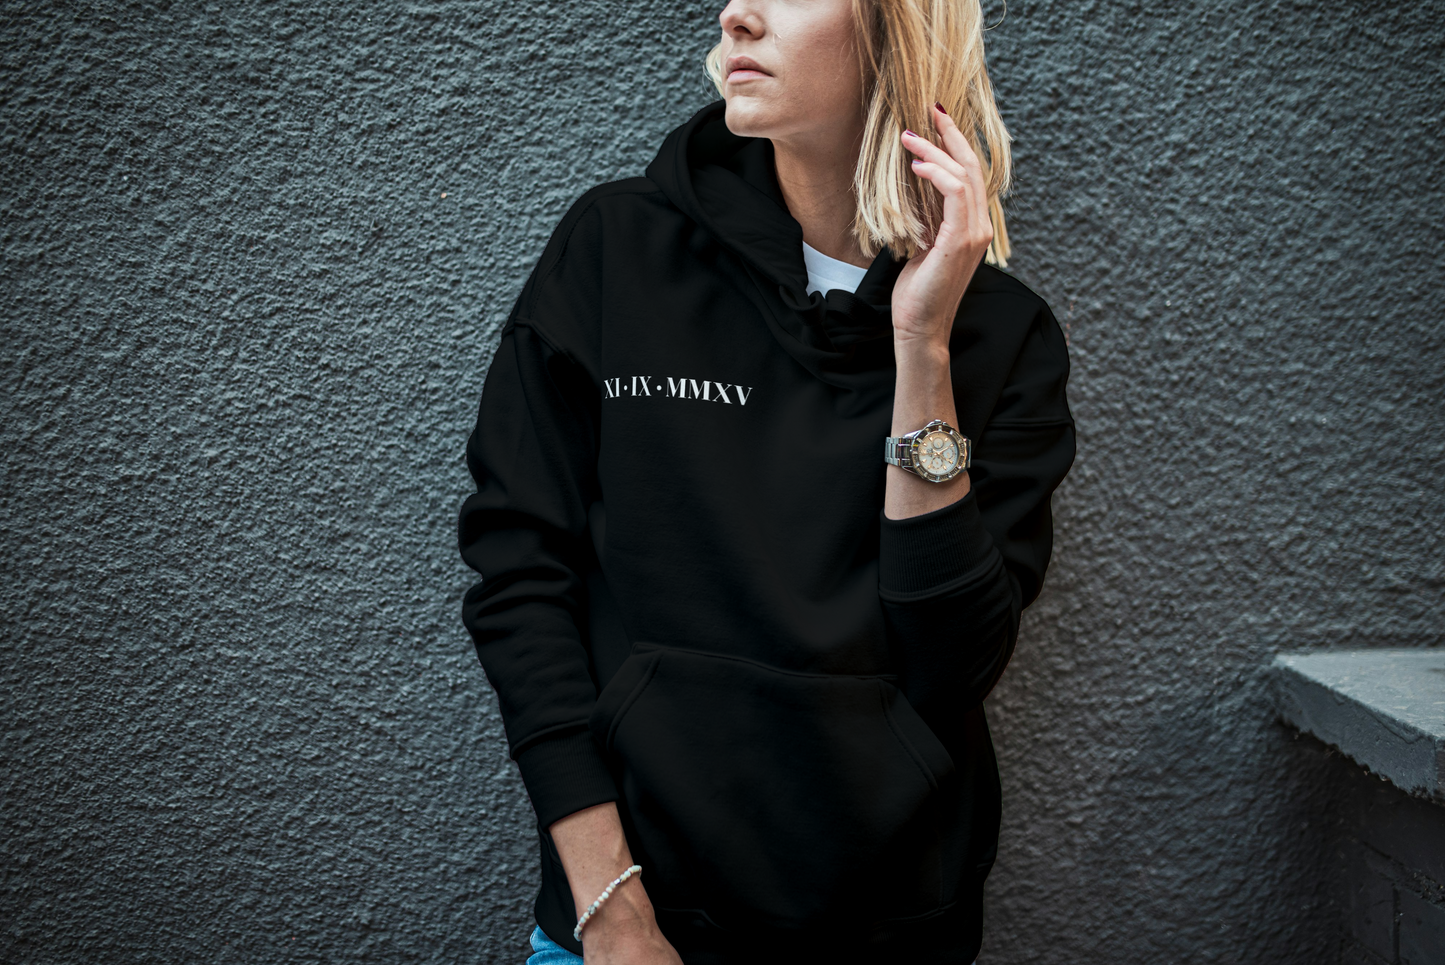 Hoddie with Roman wedding date/date of getting to know each other - Premium unisex hoodie